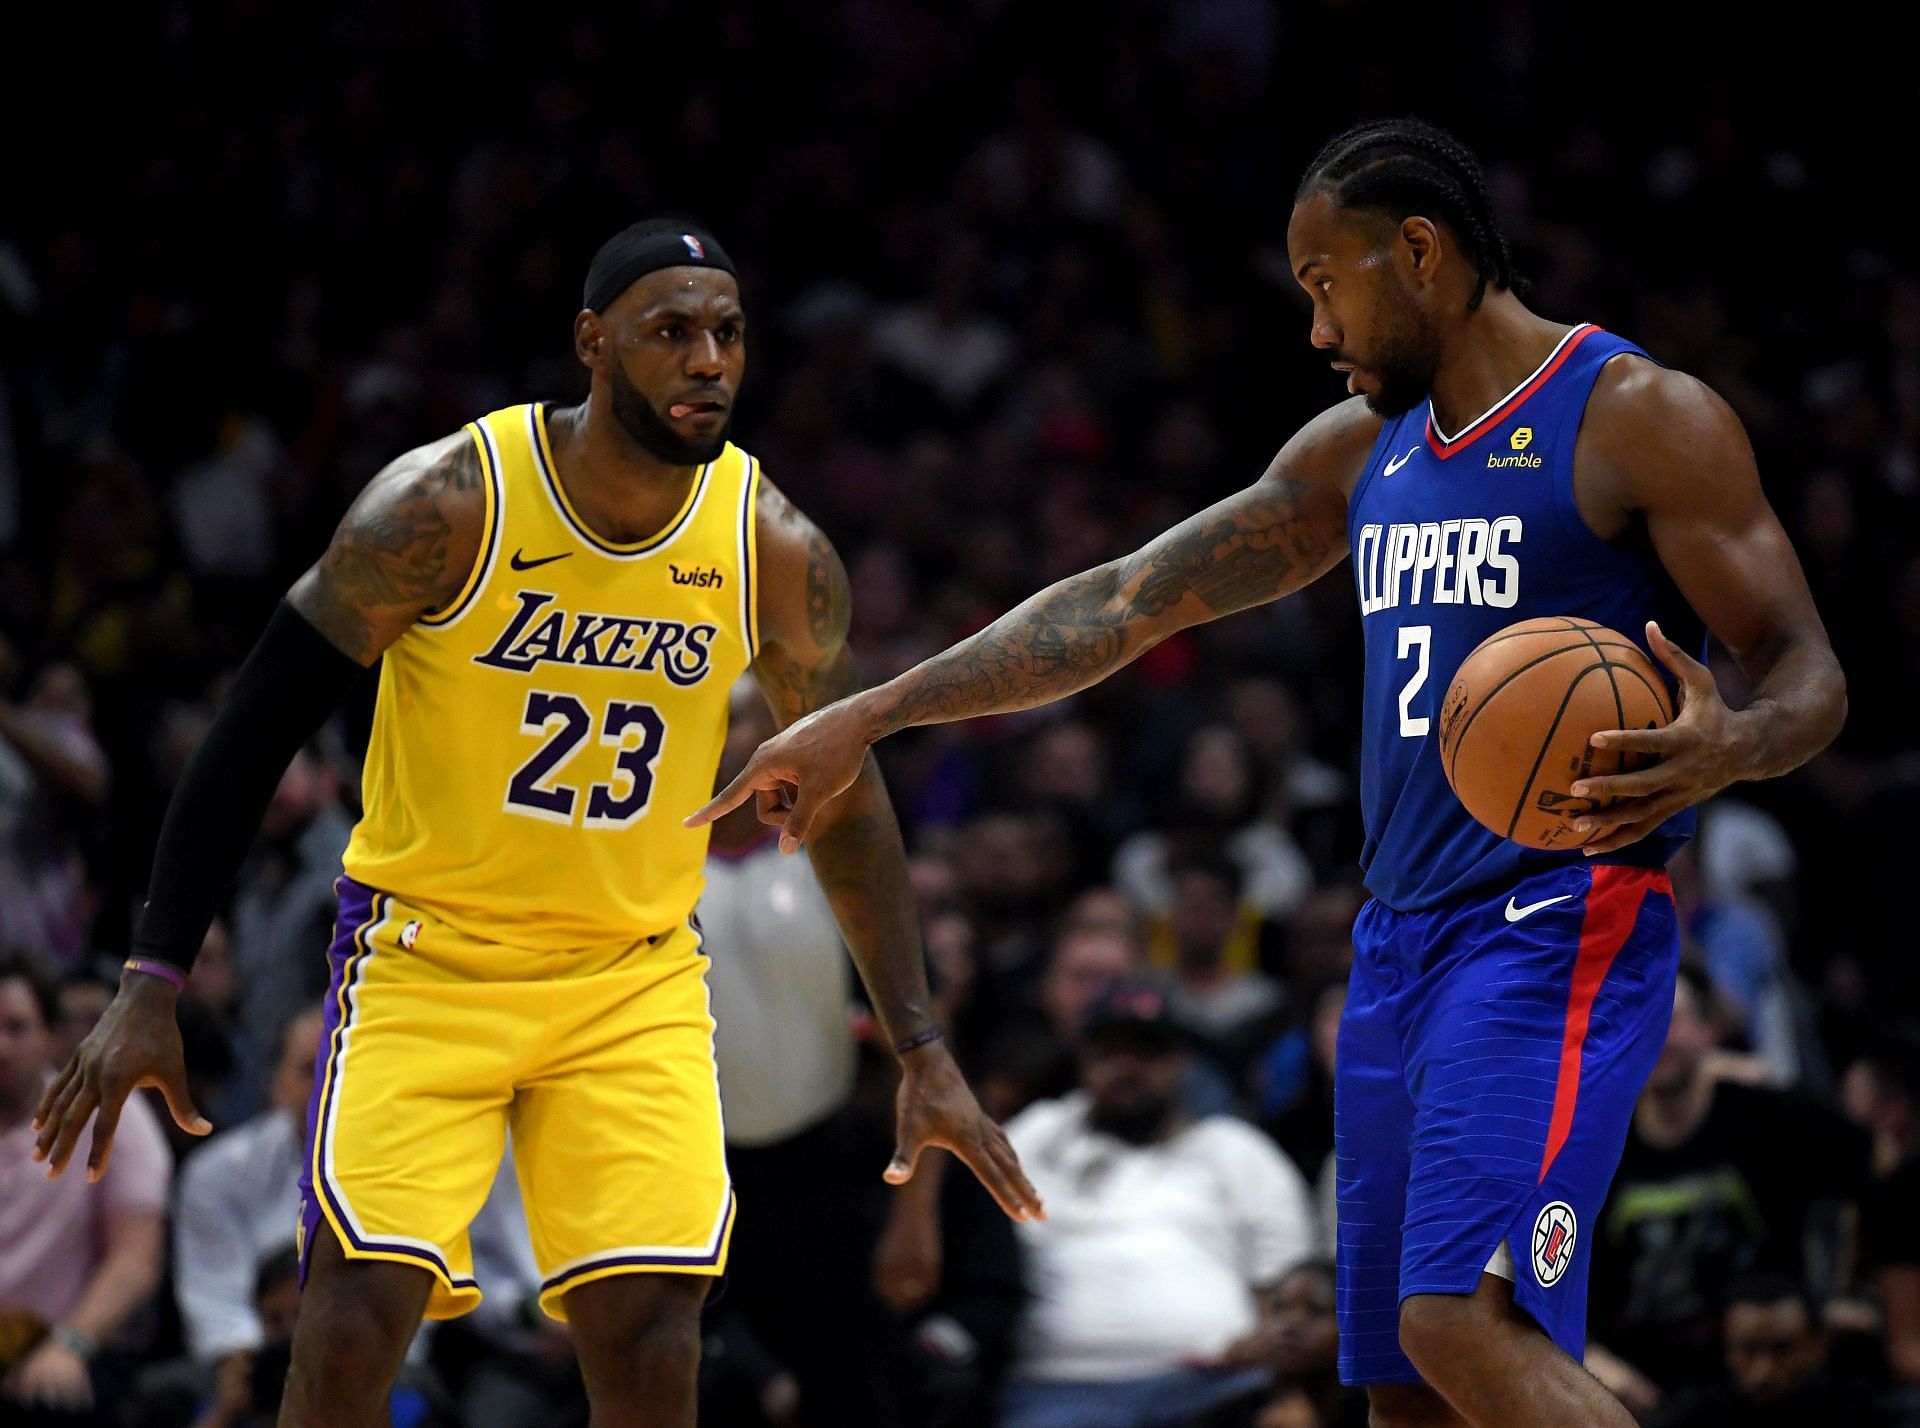 The Los Angeles Lakers are winless in 7 games against the LA Clippers over the last two seasons.